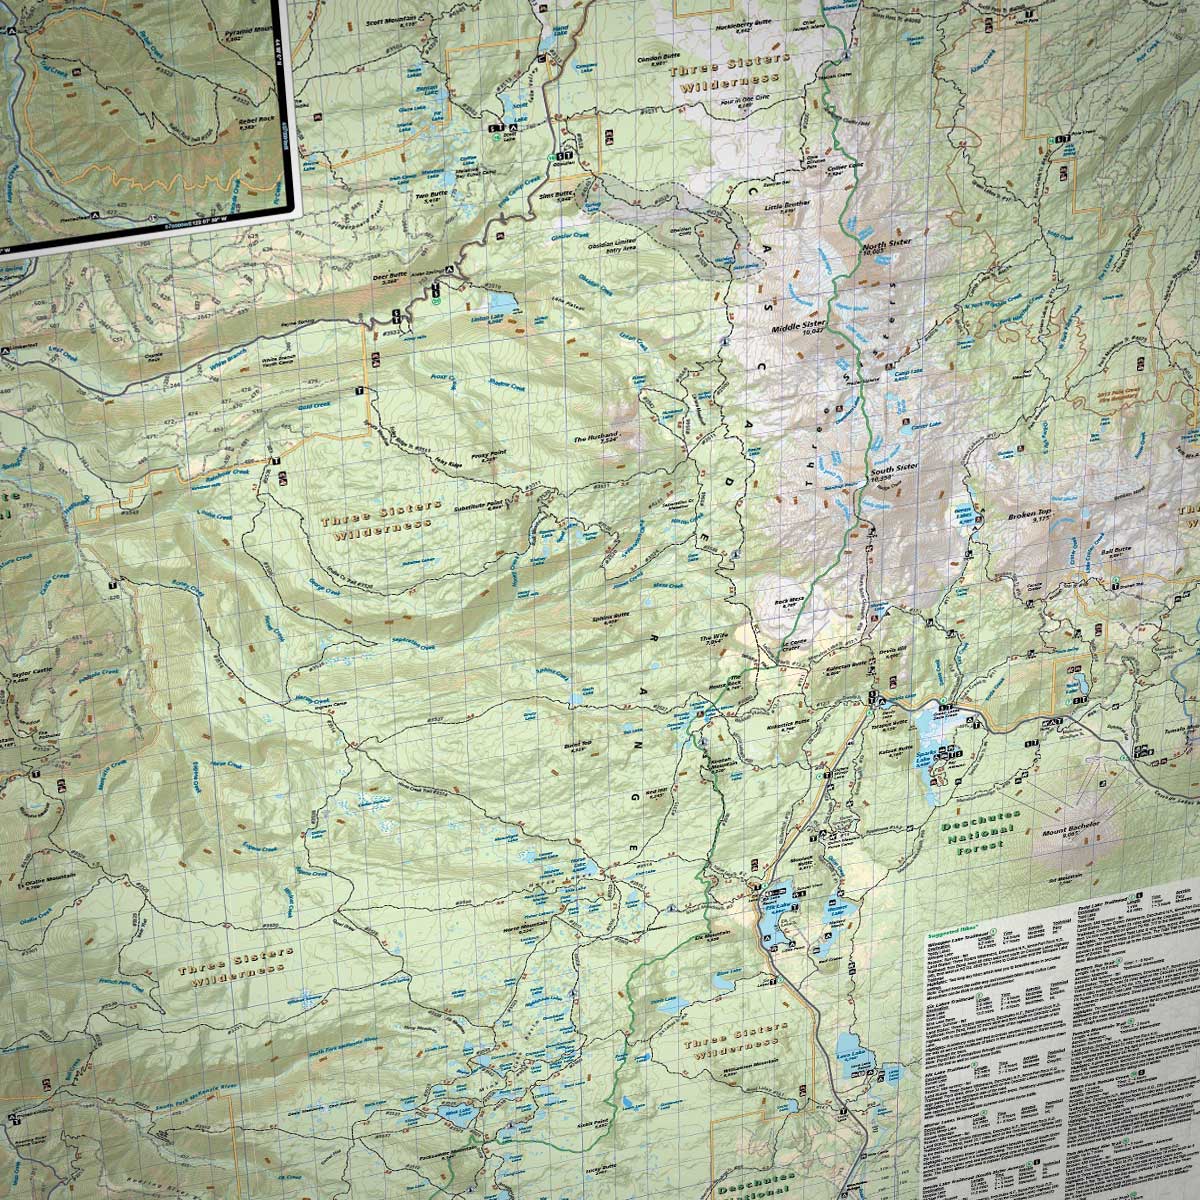 three sisters wilderness map Three Sisters Wilderness Adventure Map Bend Trails Gear